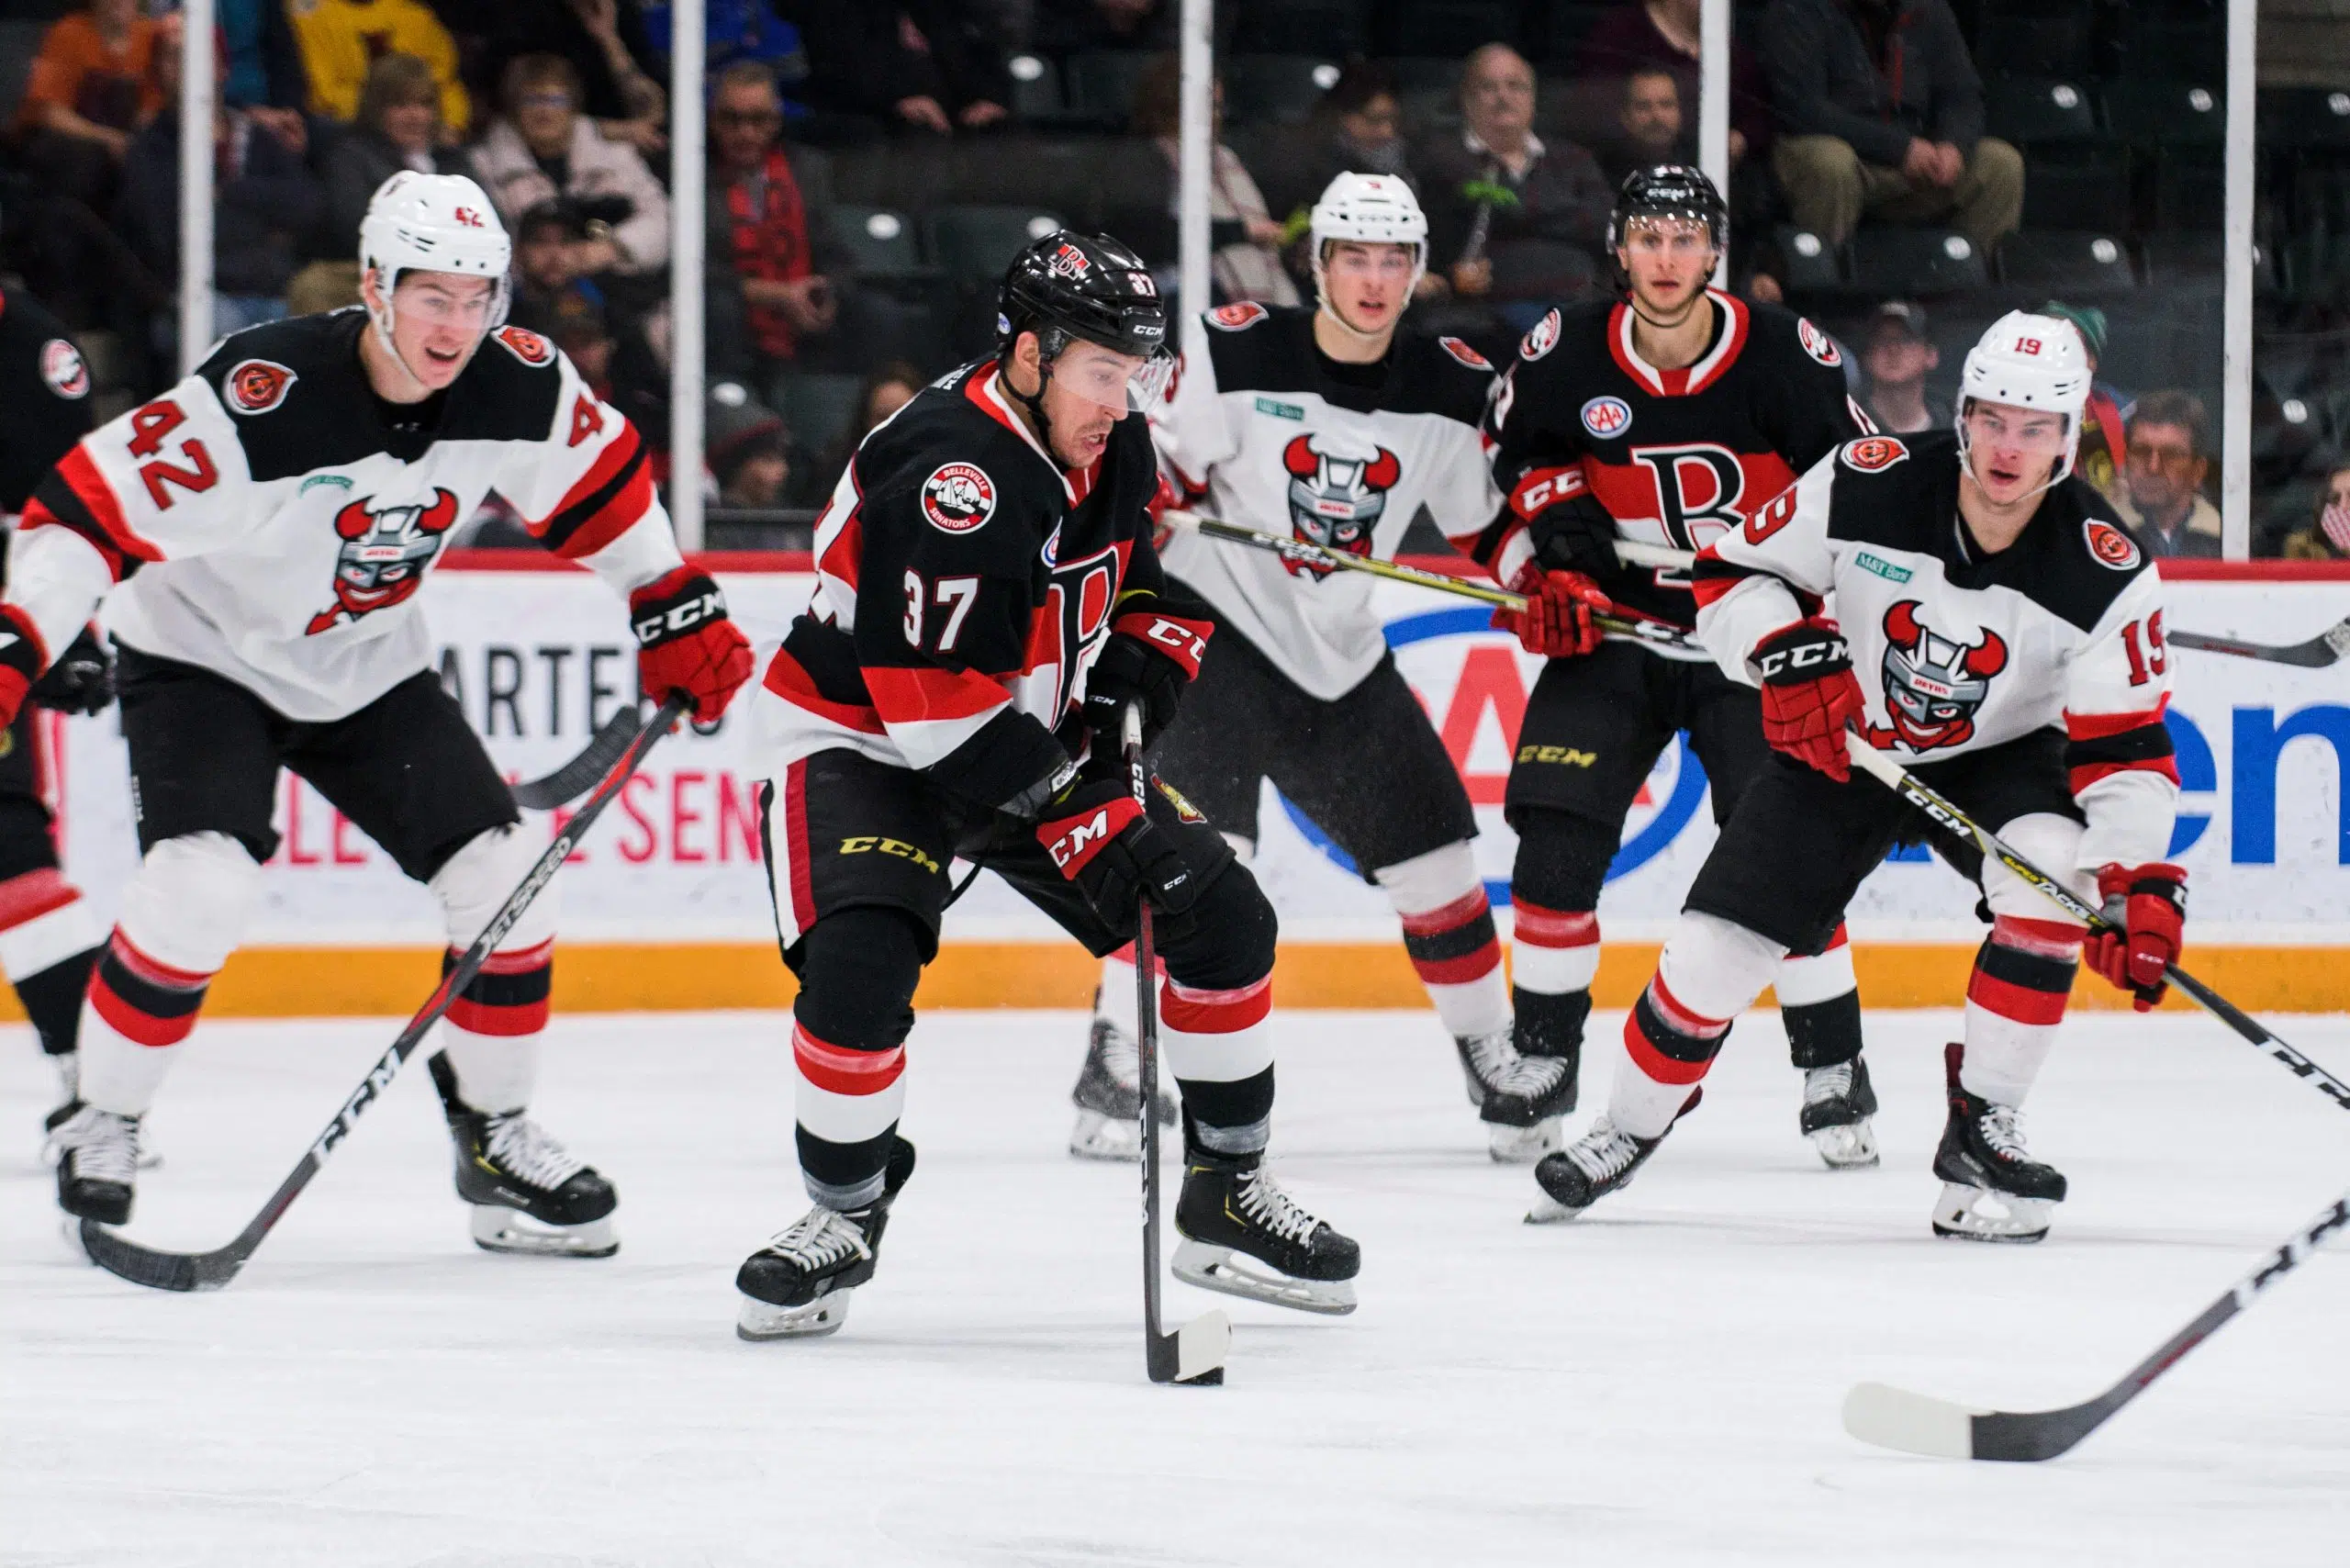 B-Sens streaking into the new year after beating Devils